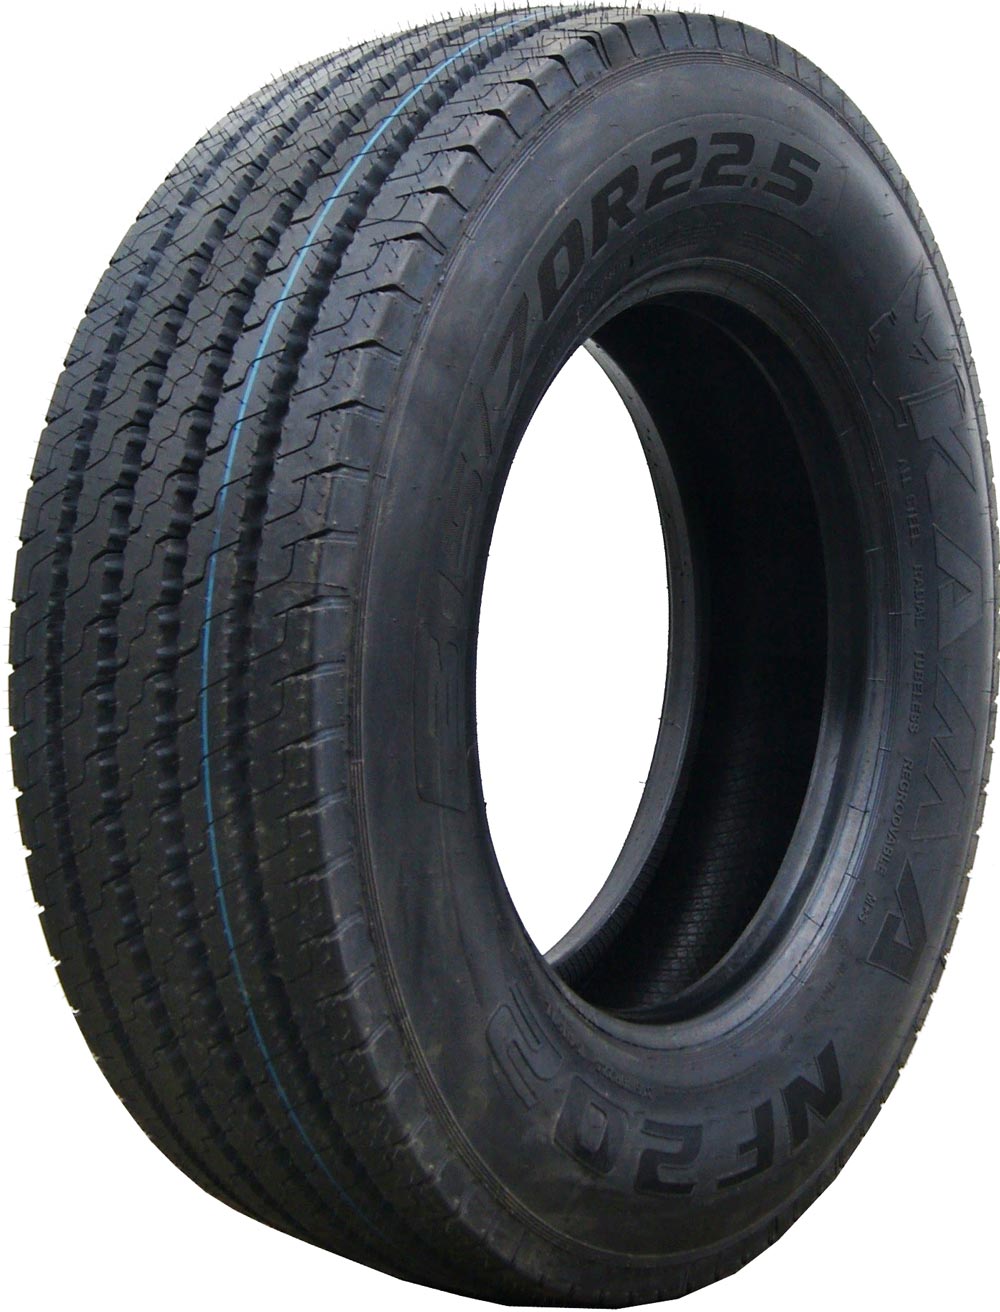 product_type-heavy_tires KAMA NF202 245/70 R17.5 136M